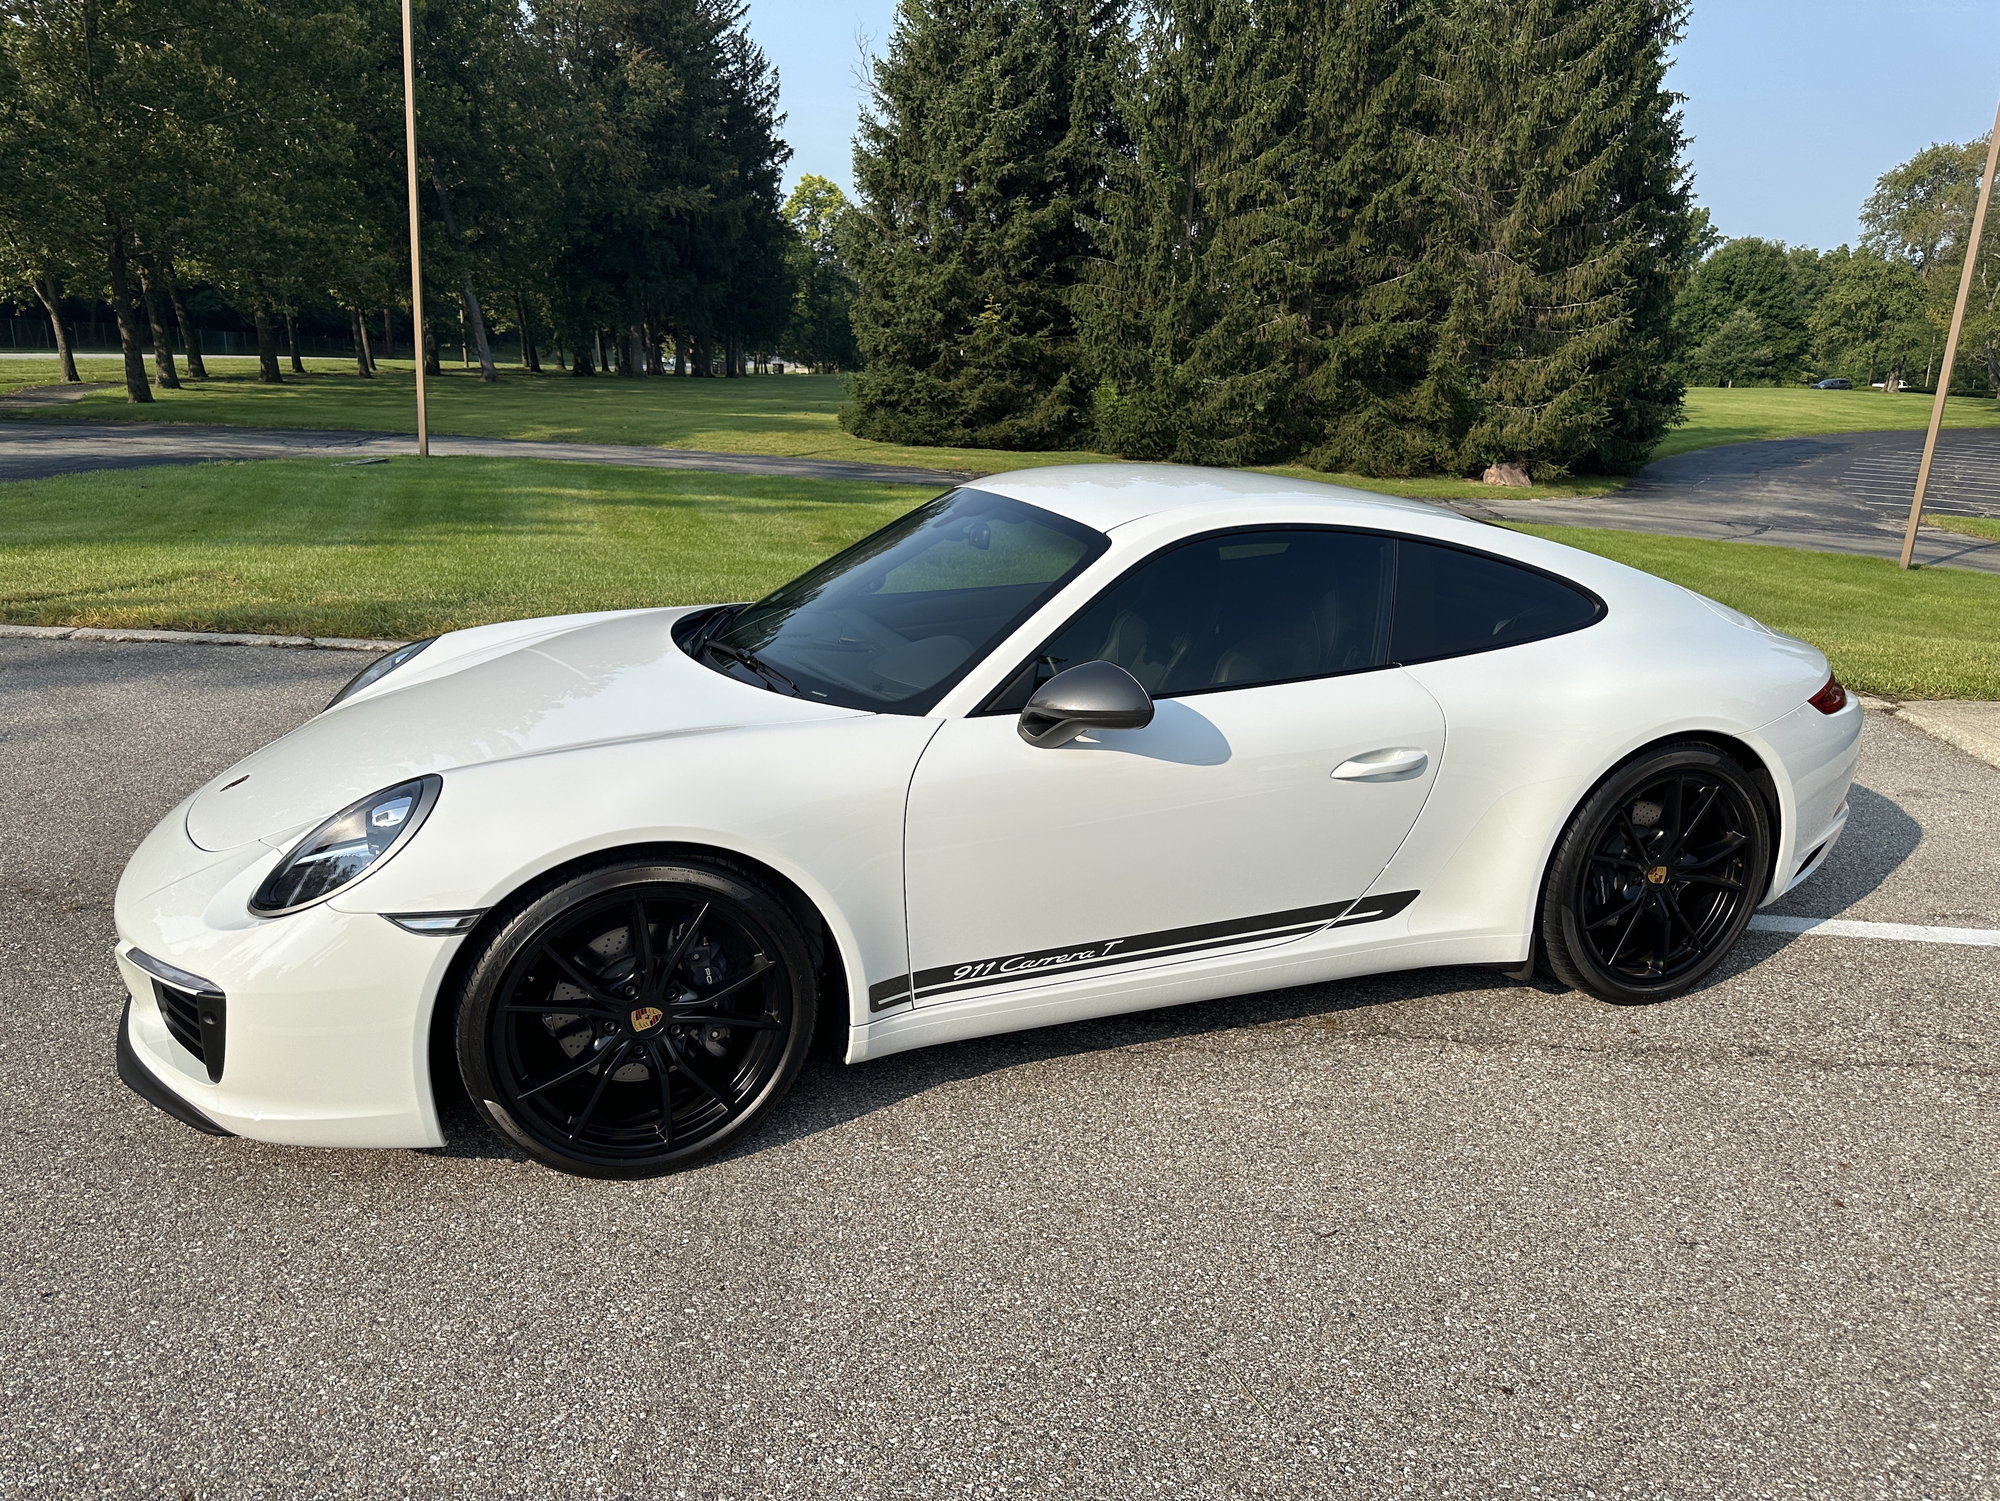 2019 Porsche 911 - 2019 Carrera T with 19 way seat, interior package, low mileage - Used - VIN WP0AA2A94KS103195 - 13,200 Miles - 6 cyl - 2WD - Manual - Coupe - White - Indianapolis, IN 46220, United States